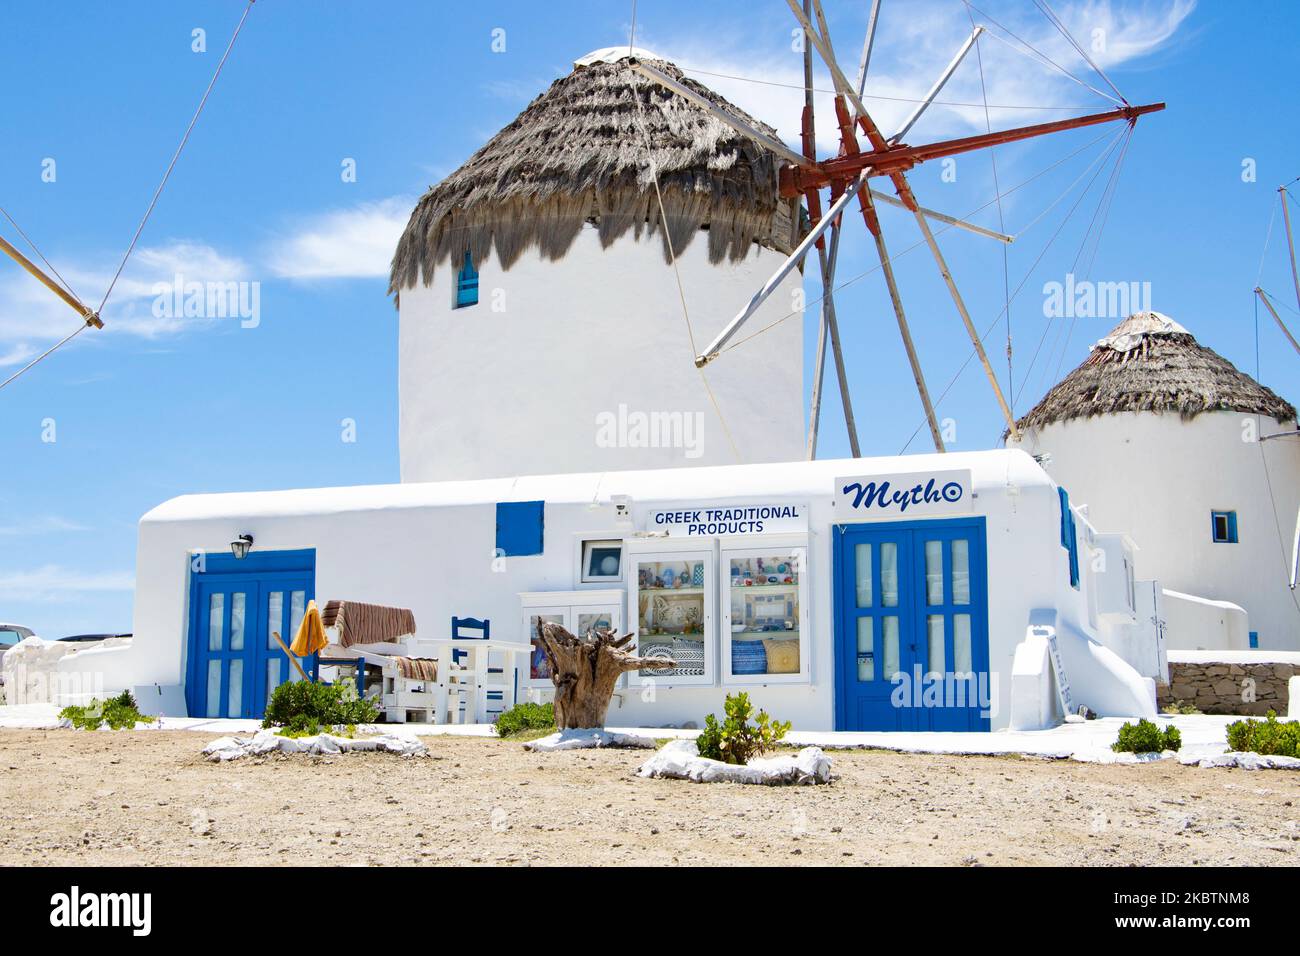 The iconic windmills in Mykonos island, Cyclades islands, Aegean Sea, Greece on July 14, 2020. There is almost nobody at the windmills because of the Coronavirus pandemic measures and traffic ban that Greece applied. There are 16 windmills on the island, 5 of them above Chora or Mykonos Town, the main town on the island. The windmills were built in the 16th century from the Venetians but their constructions continued until the 20th century. The famous Mediterranean Greek island is nicknamed as The Island of the Winds with whitewashed traditional buildings like windmills or little church. Mykon Stock Photo